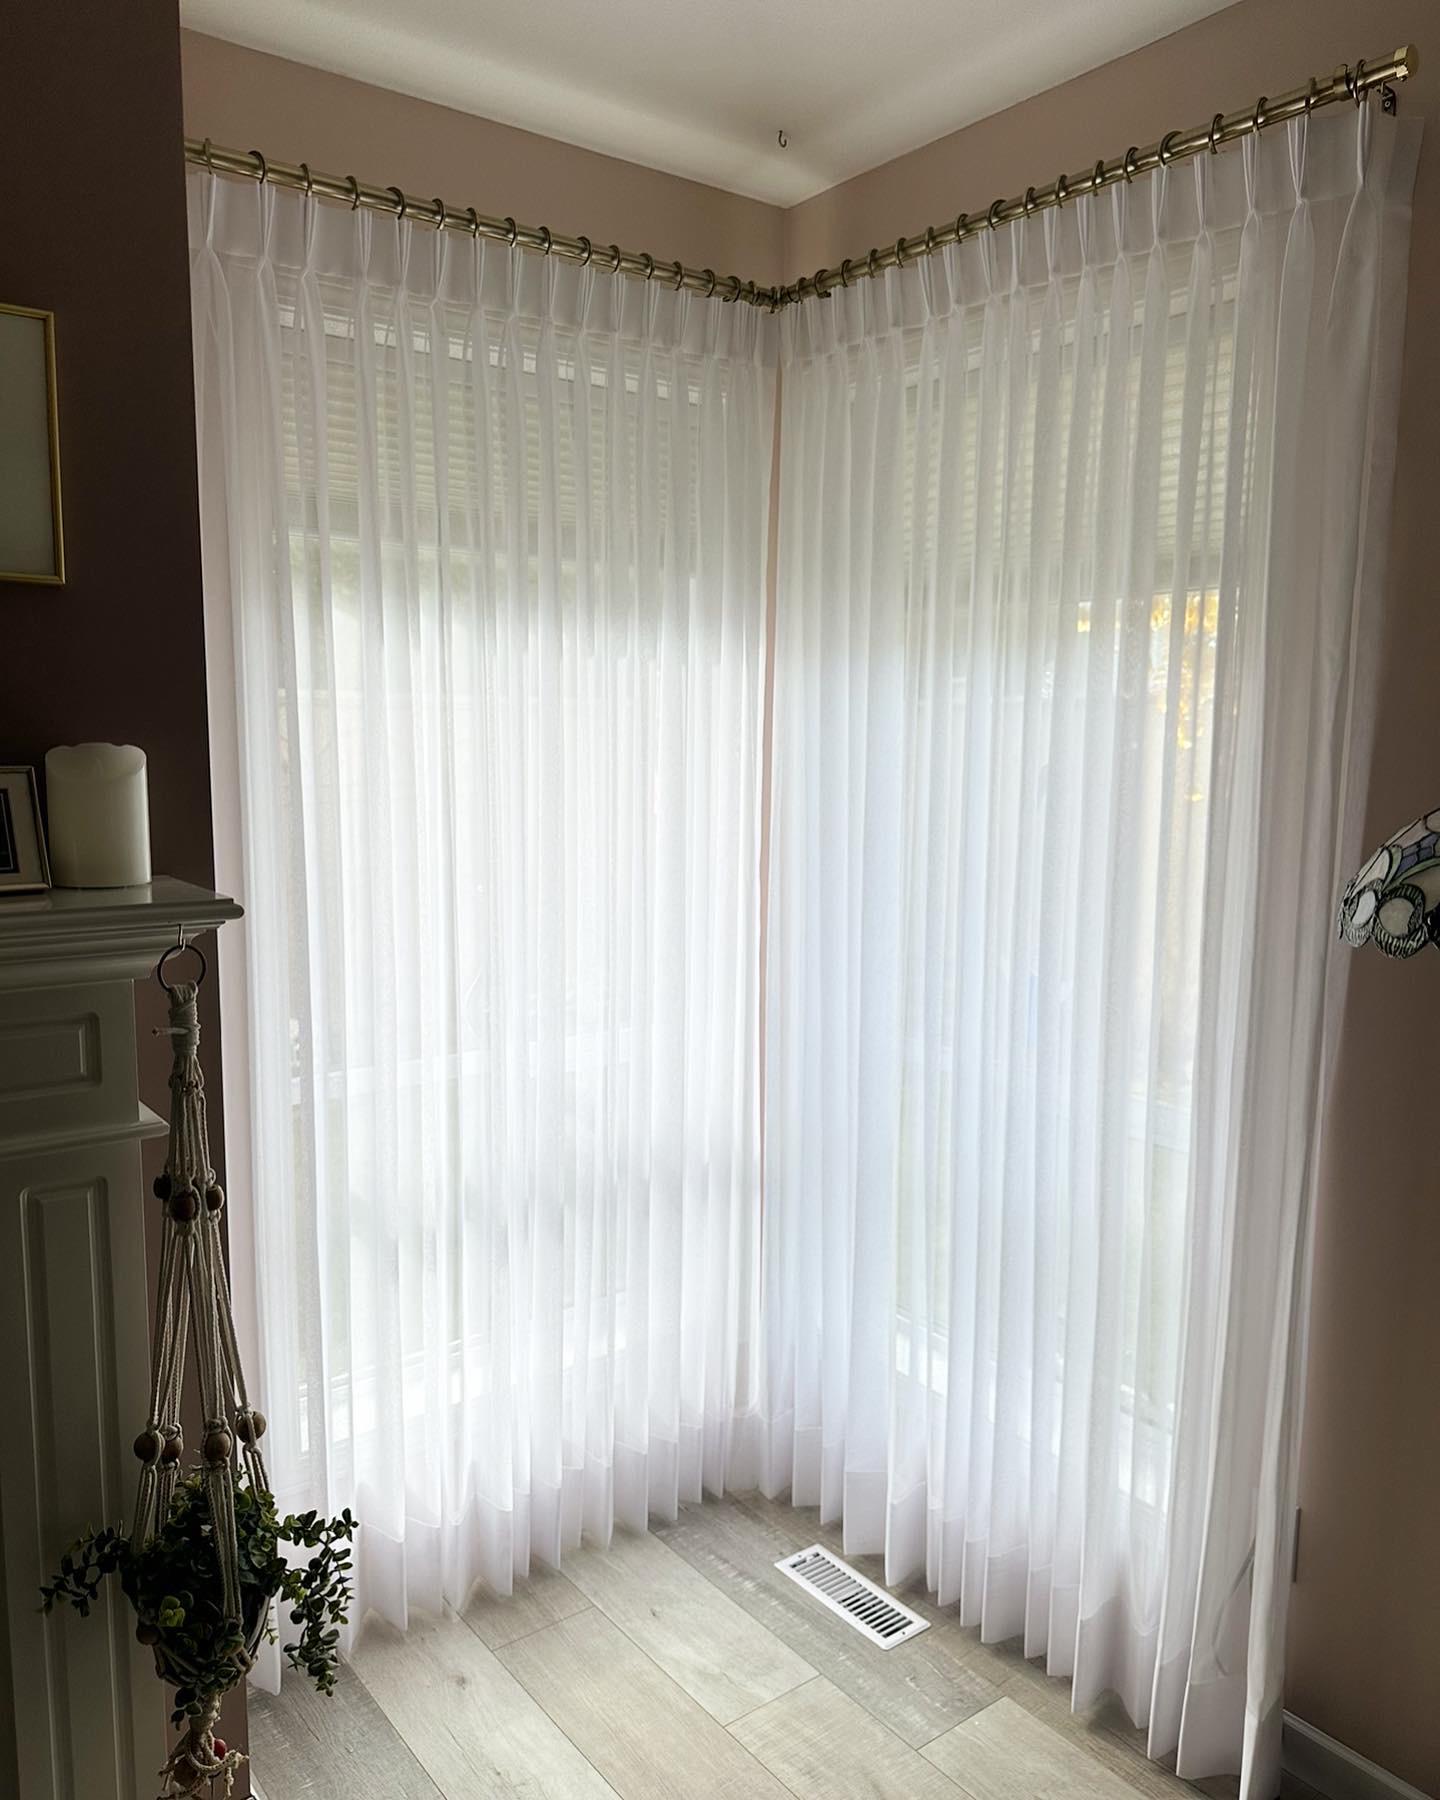 Custom Sheer Drapery filters light beautifully into this living space. Budget Blinds of Chilliwack, Hope and Harrison Chilliwack (604)824-0375